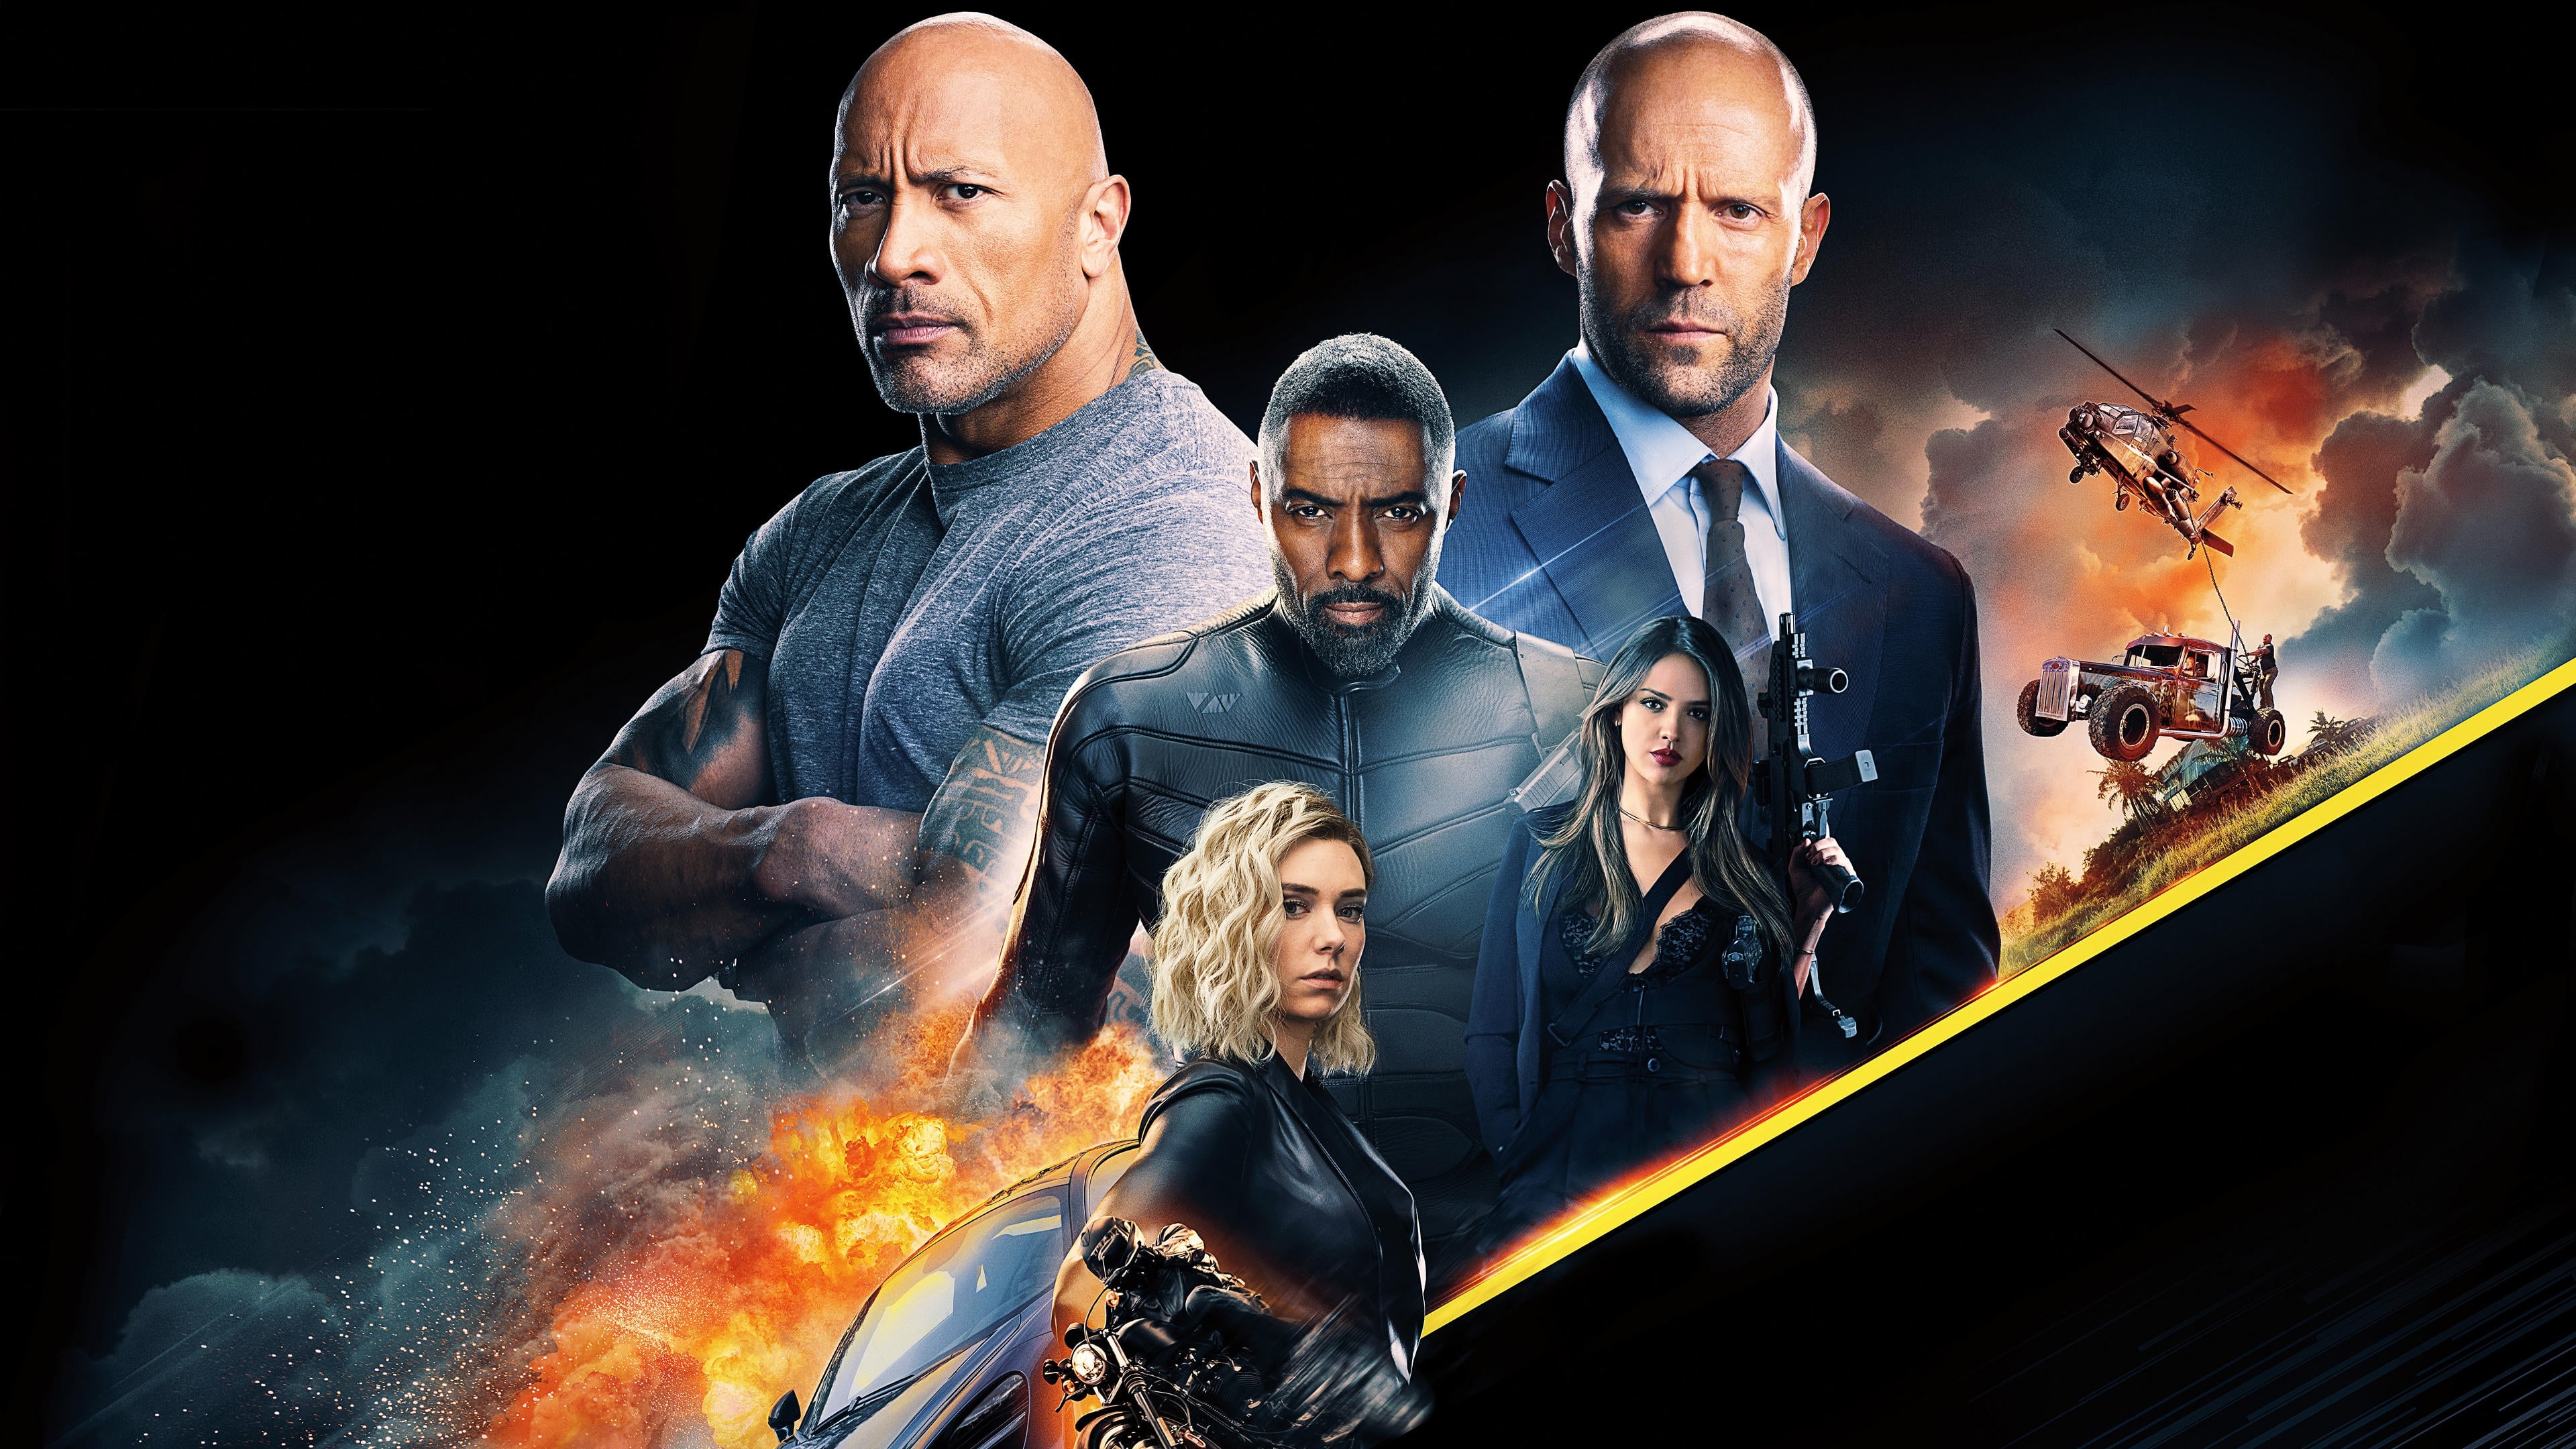 Fast & Furious Presents: Hobbs & Shaw Free Online Movie